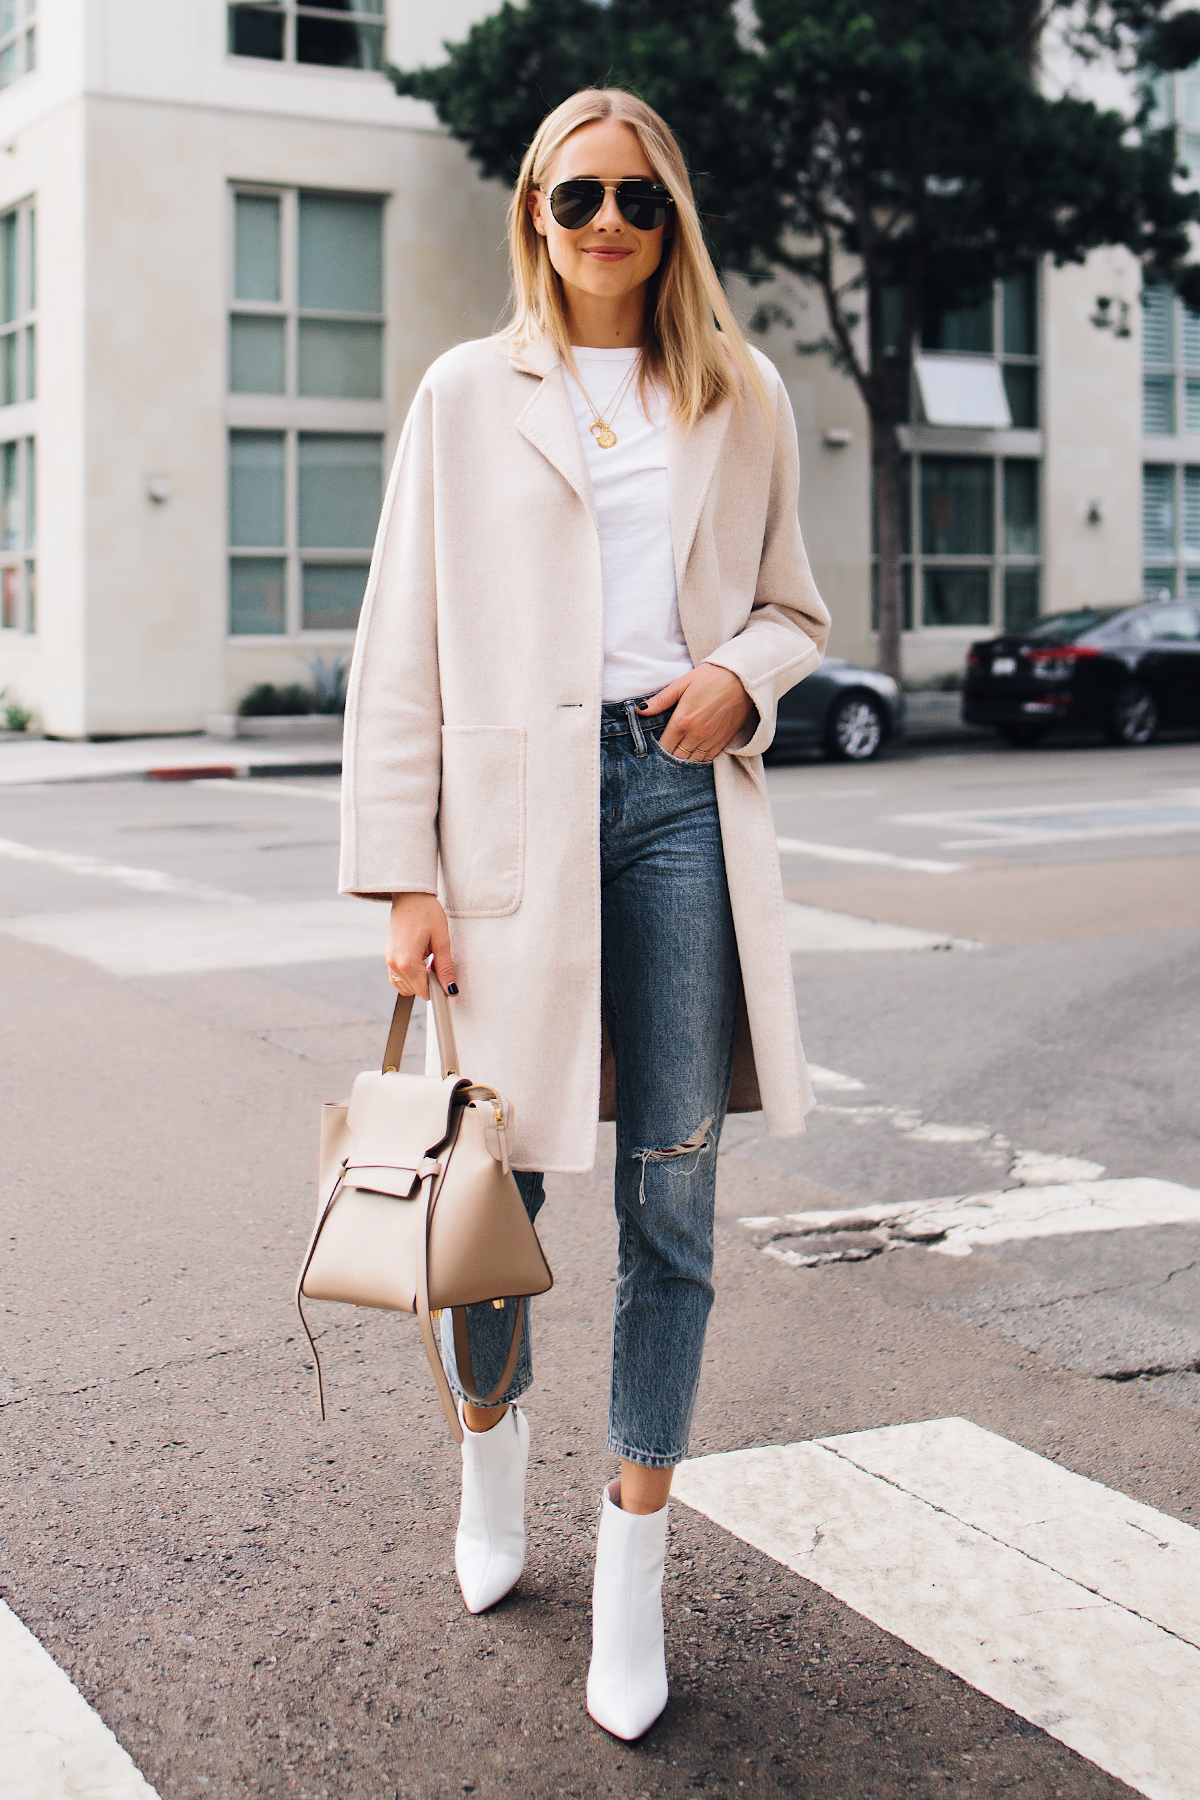 A Stylish Way to Wear White Booties 